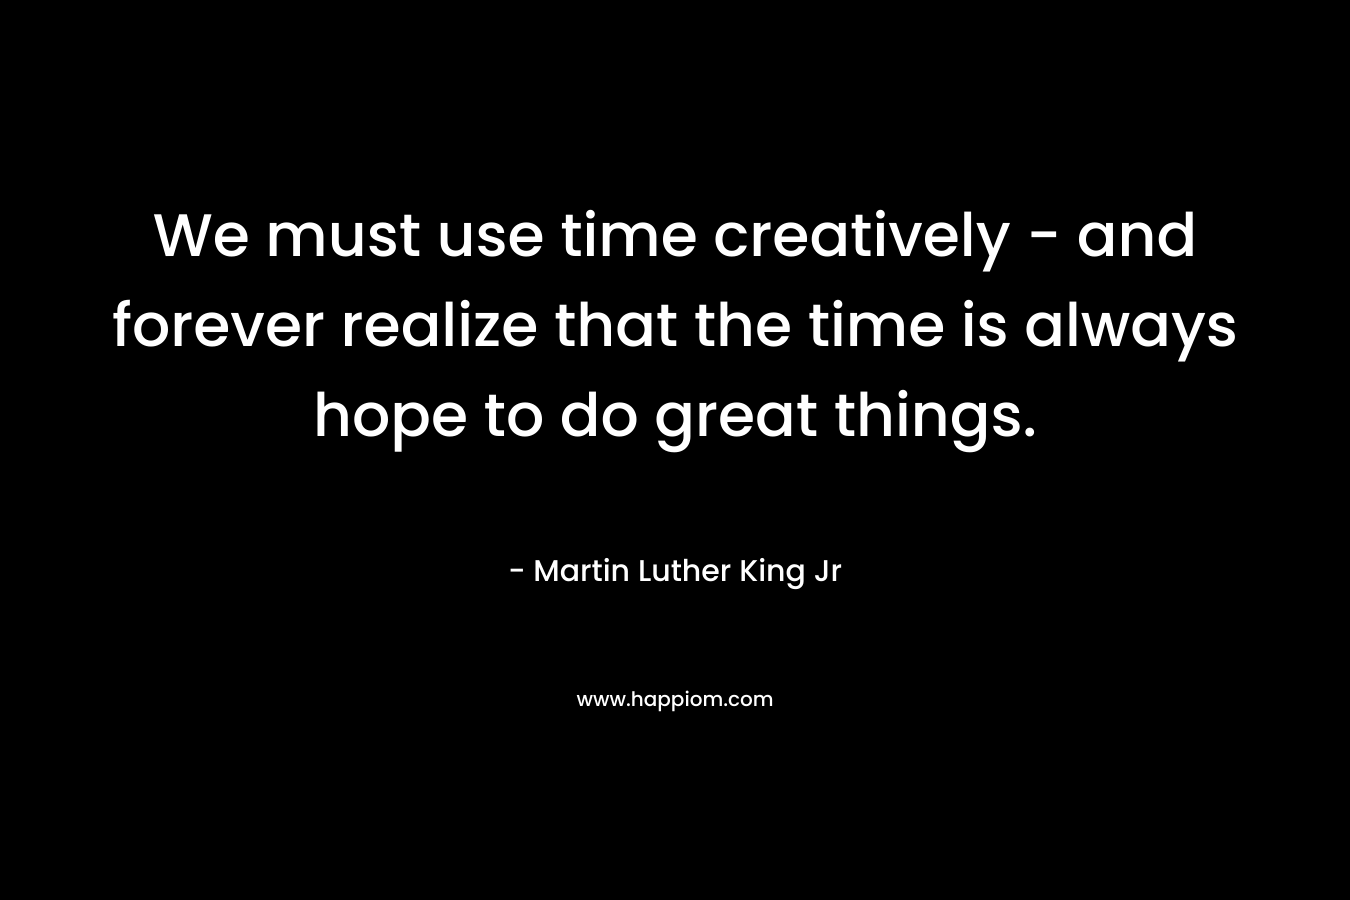 We must use time creatively - and forever realize that the time is always hope to do great things.